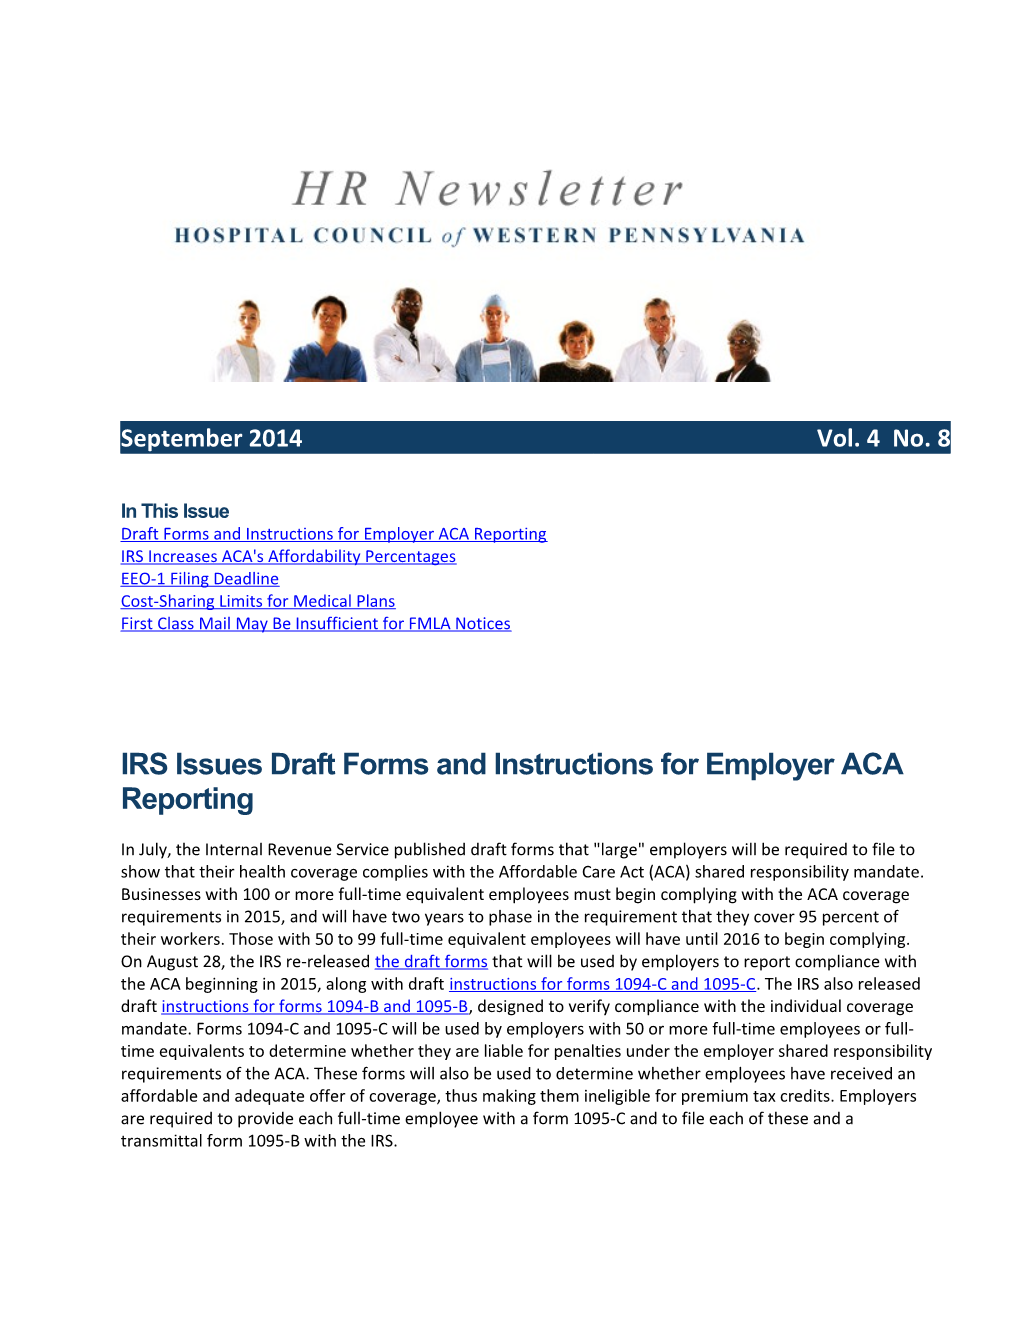 Draft Forms and Instructions for Employer ACA Reporting